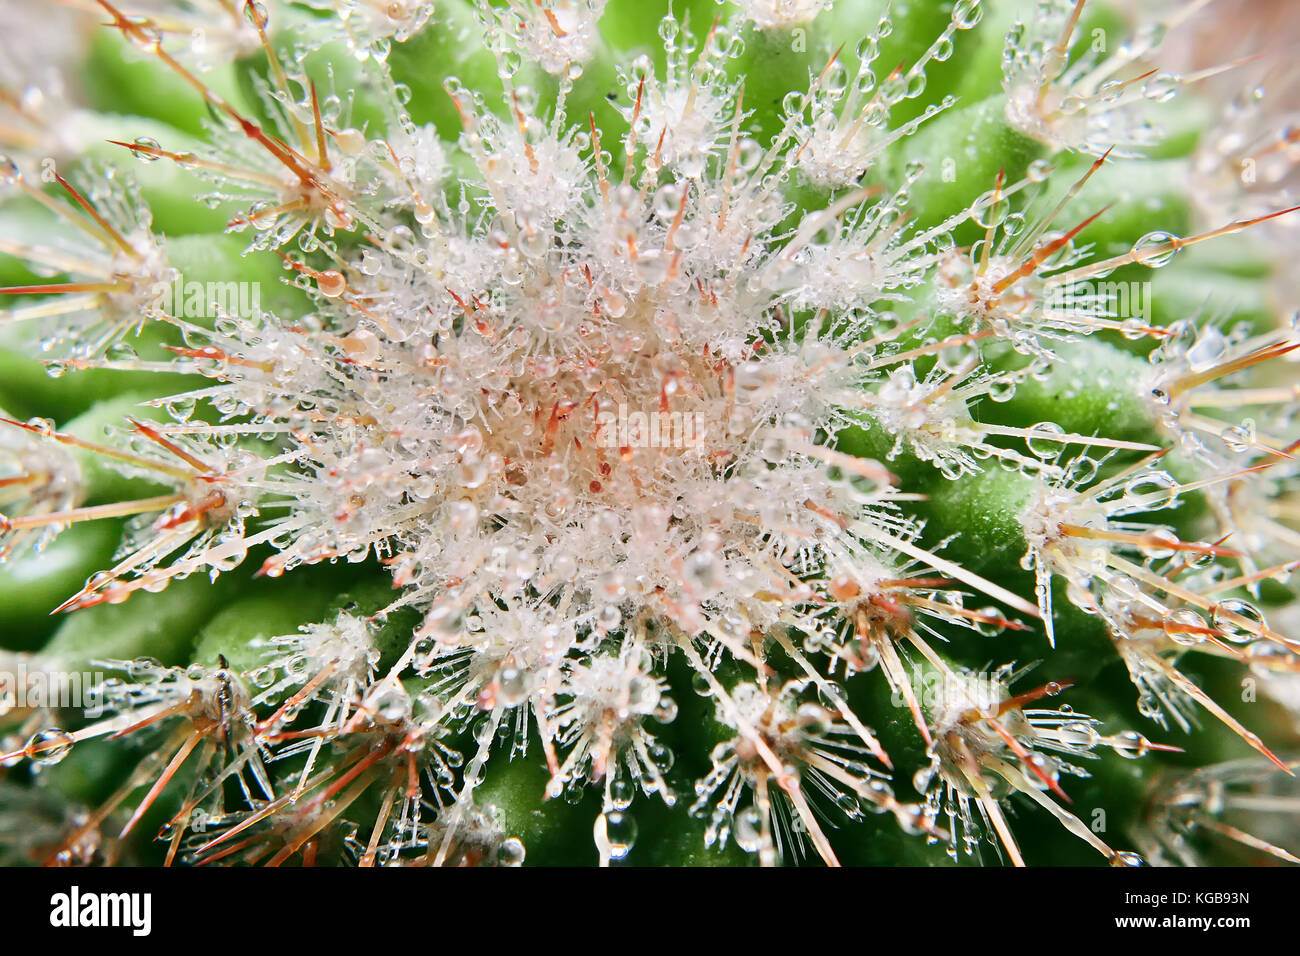 Green and fresh Cactaceae Copiapoa cactus with dews in detail macro Stock Photo